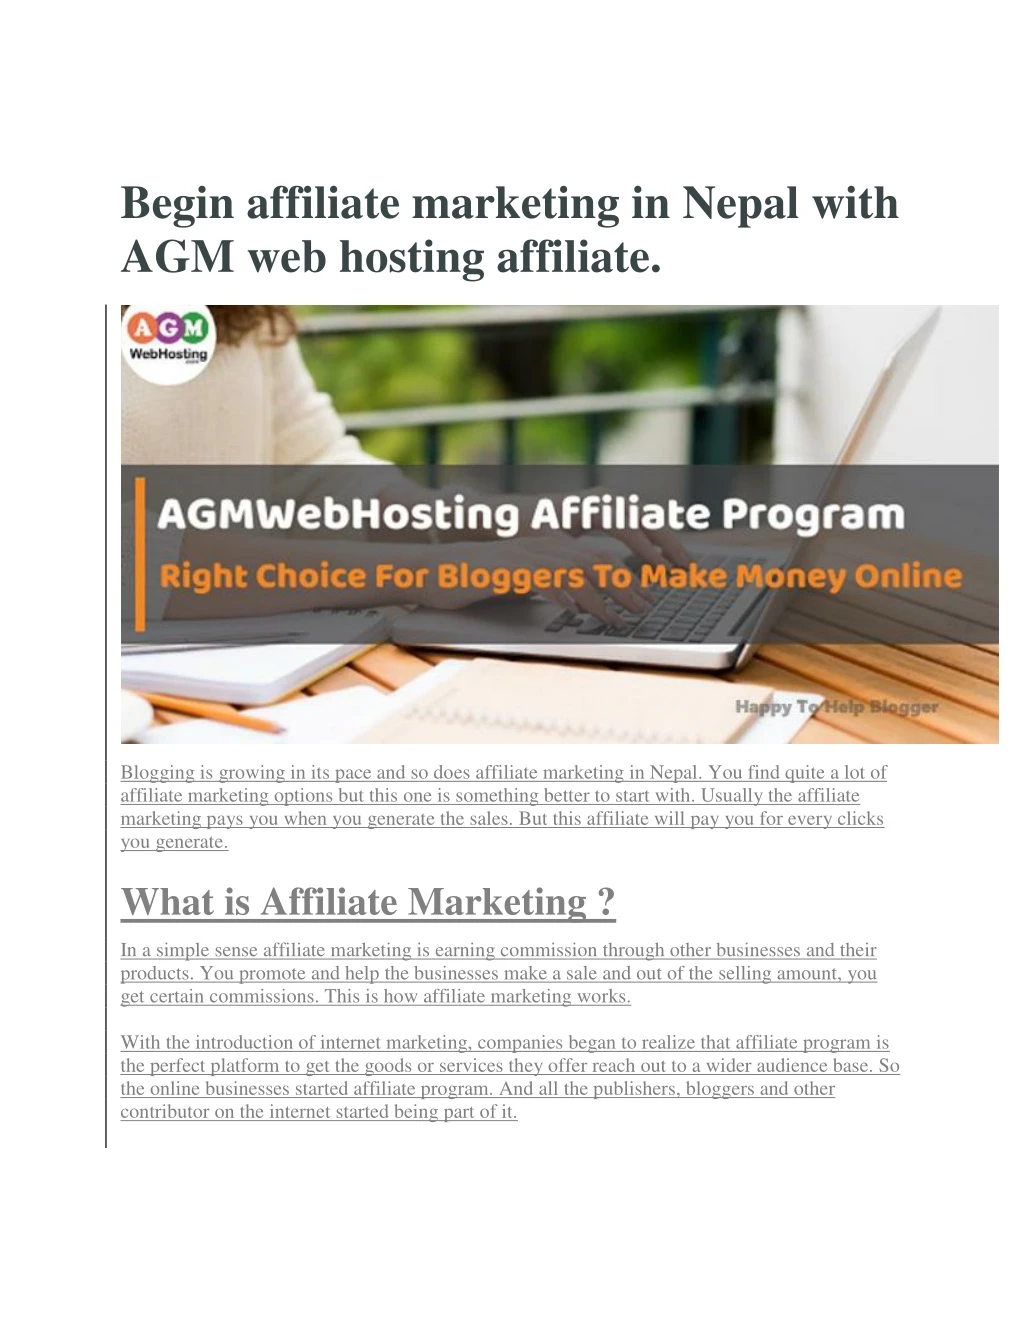 begin affiliate marketing in nepal with